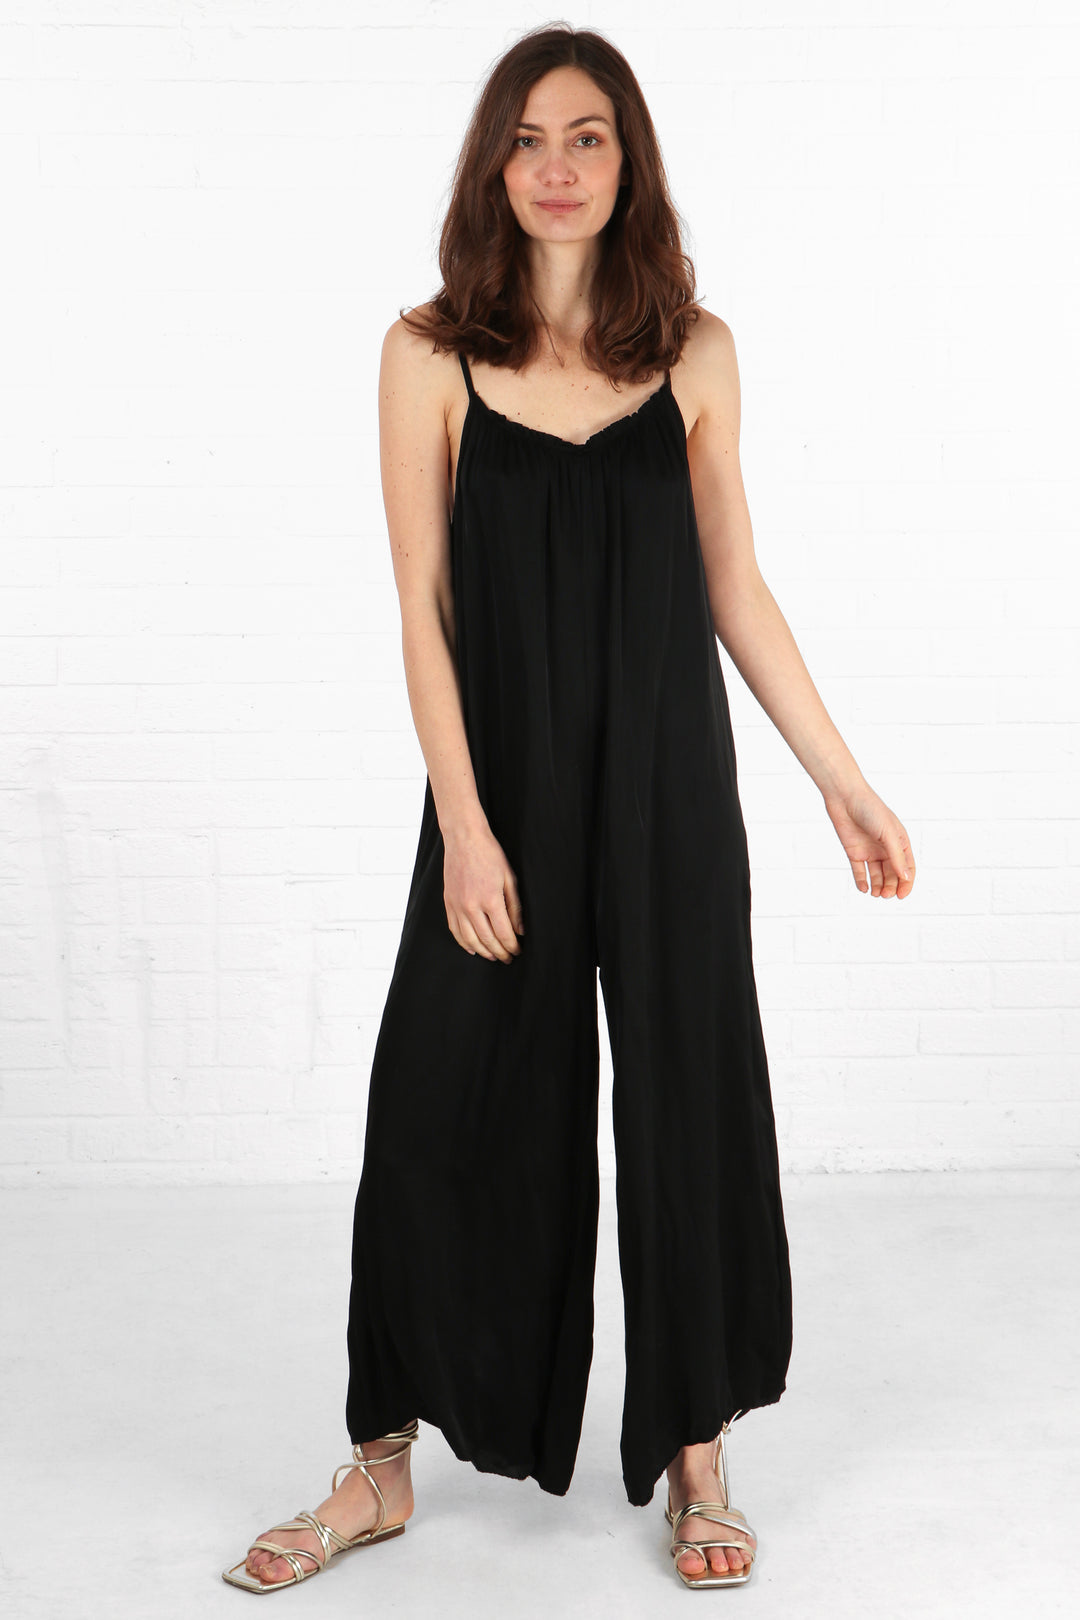 silky textured wide leg maxi length jumpsuit with thin spaghetti straps